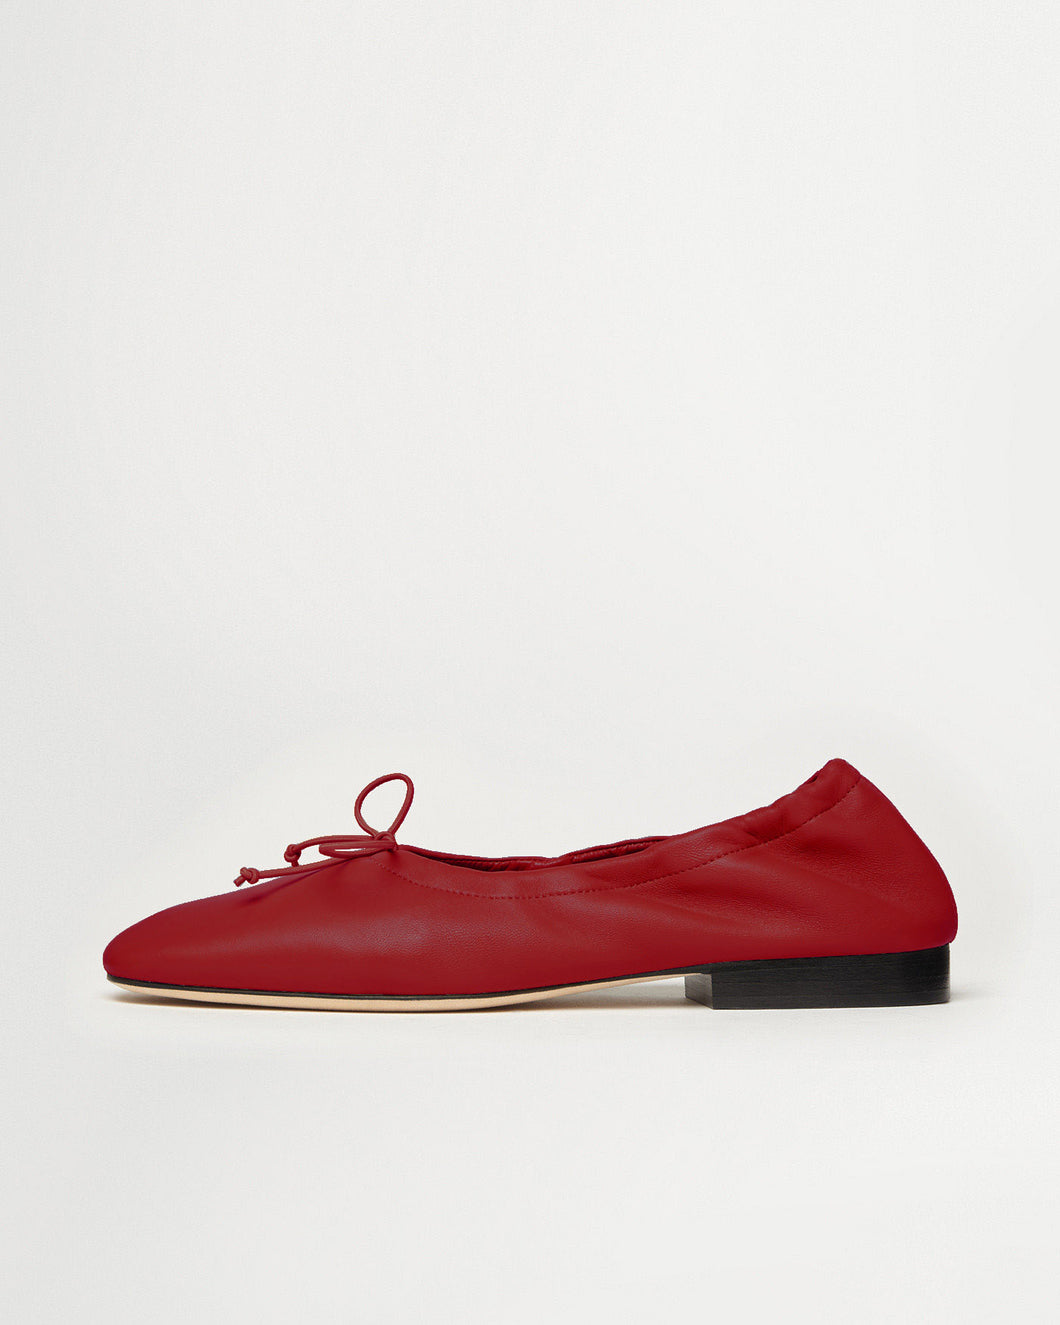 Side view of Yuni Buffa Pia Ballet flat designer shoes in Cherry Red. Luxury hand crafted square toe ballet flats made in Italy with Italian soft Lamb Nappa leather.